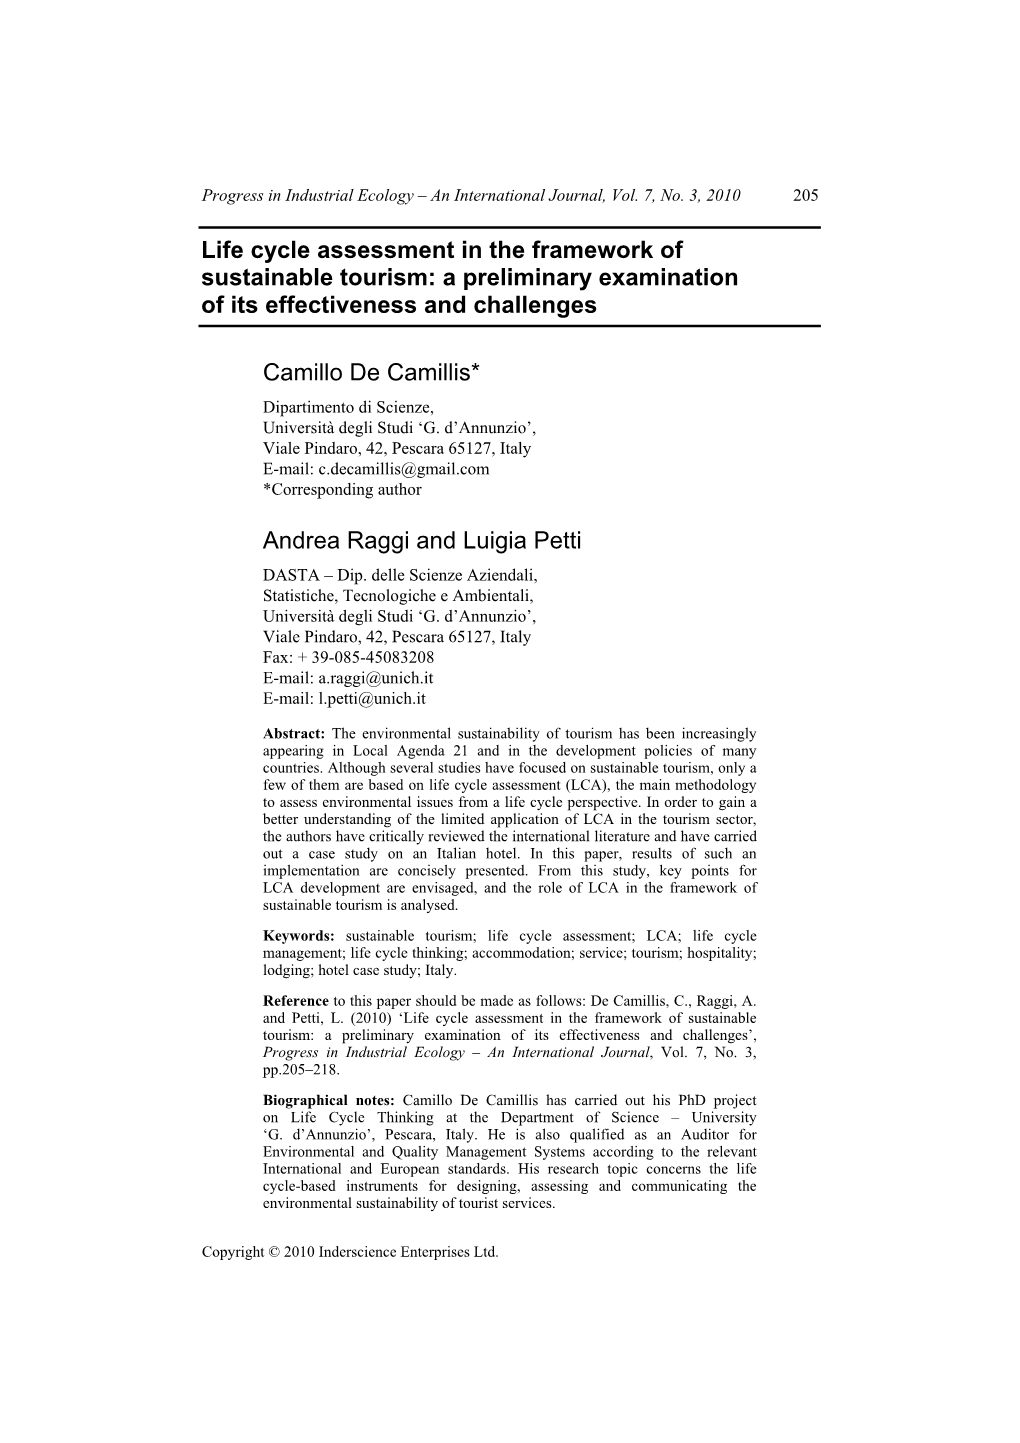 Life Cycle Assessment in the Framework of Sustainable Tourism: a Preliminary Examination of Its Effectiveness and Challenges